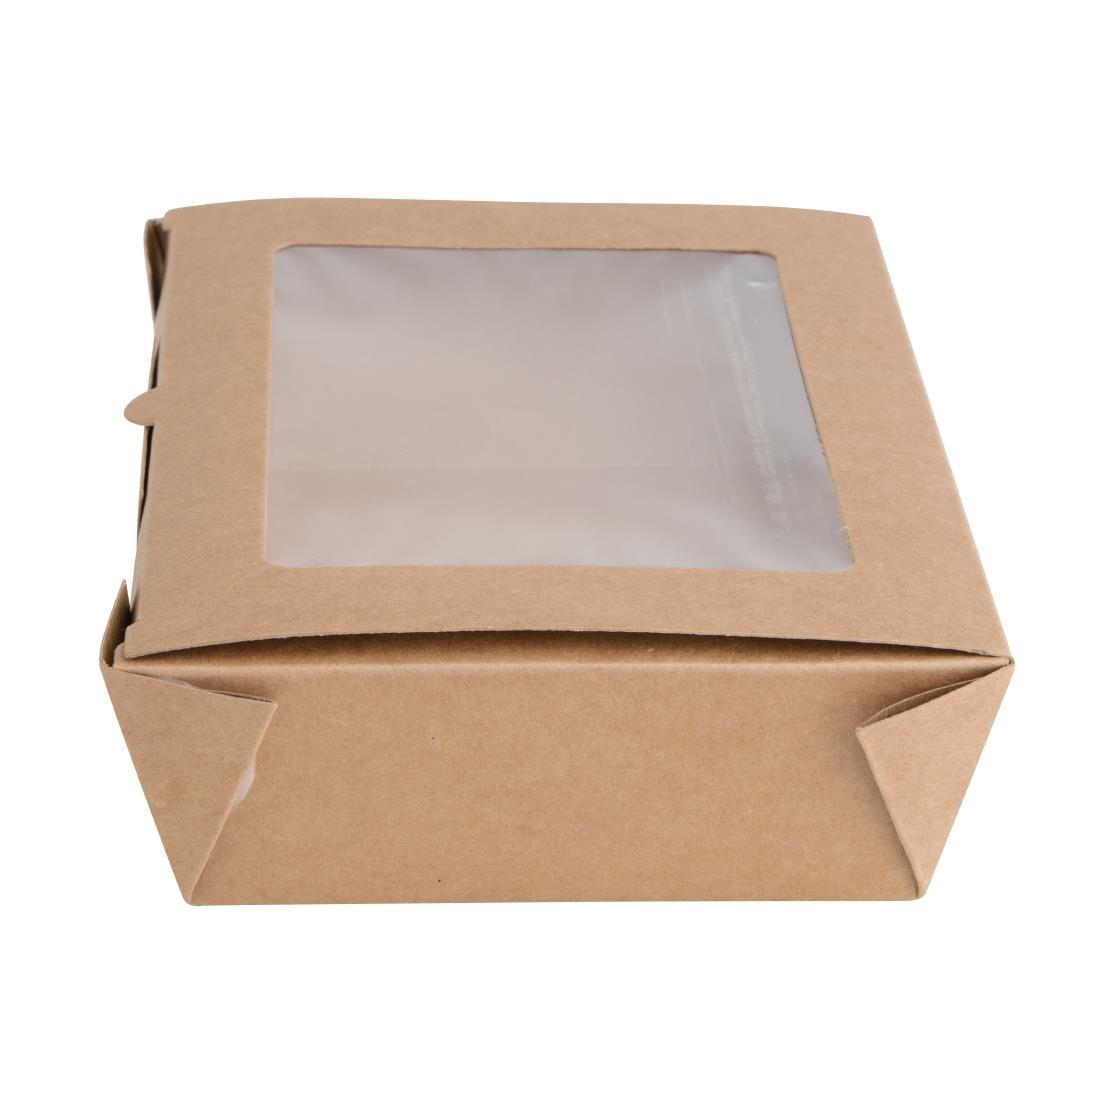 Fiesta Compostable Salad Boxes with PLA Windows 1600ml (Pack of 200) - FB678  - 3